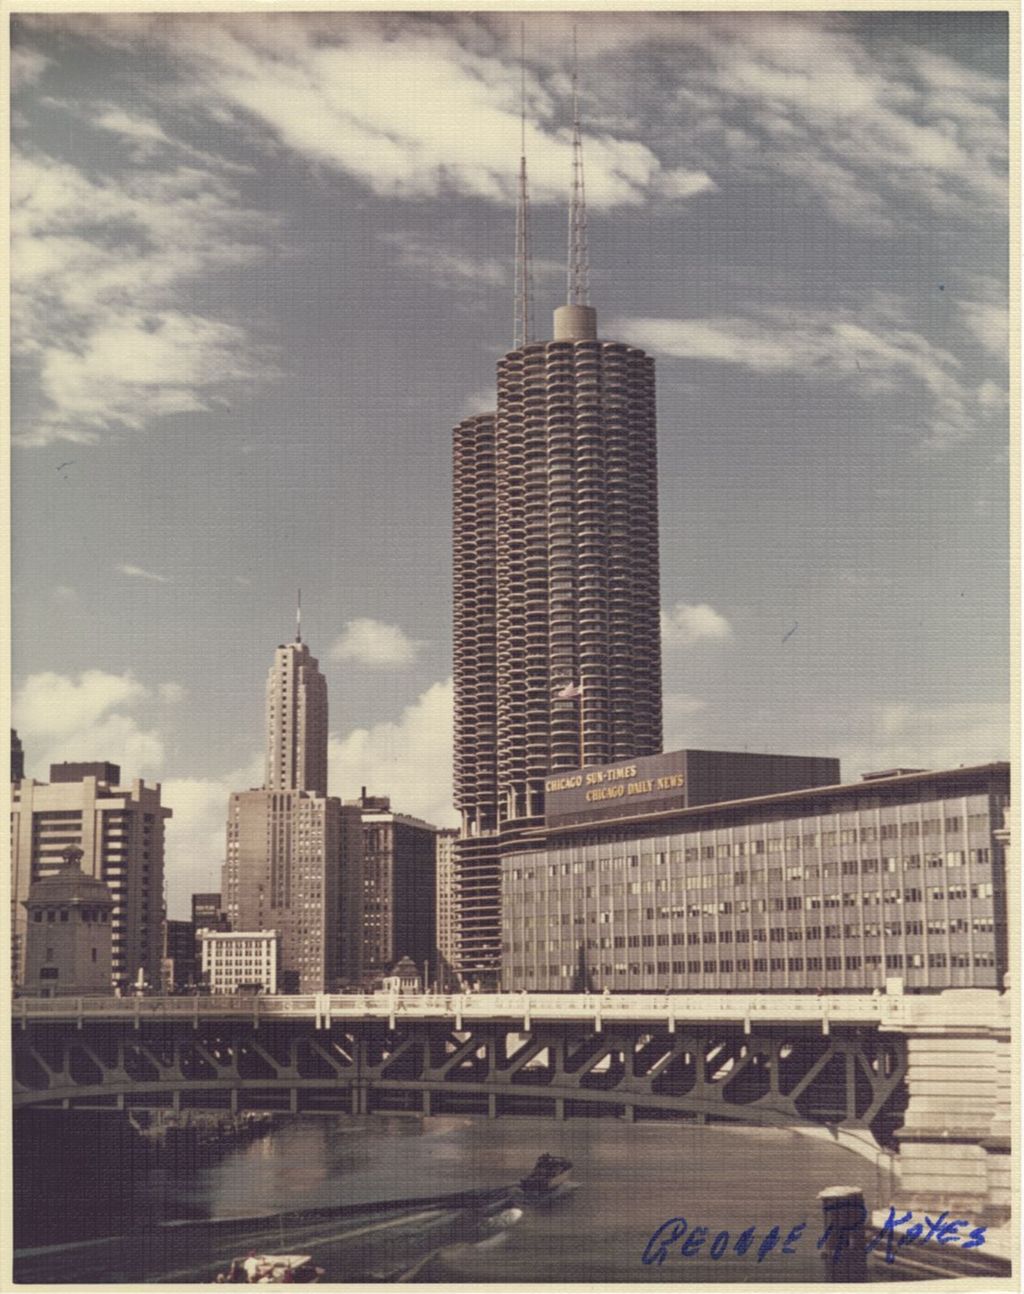 Marina City and the Chicago Sun-Times Building